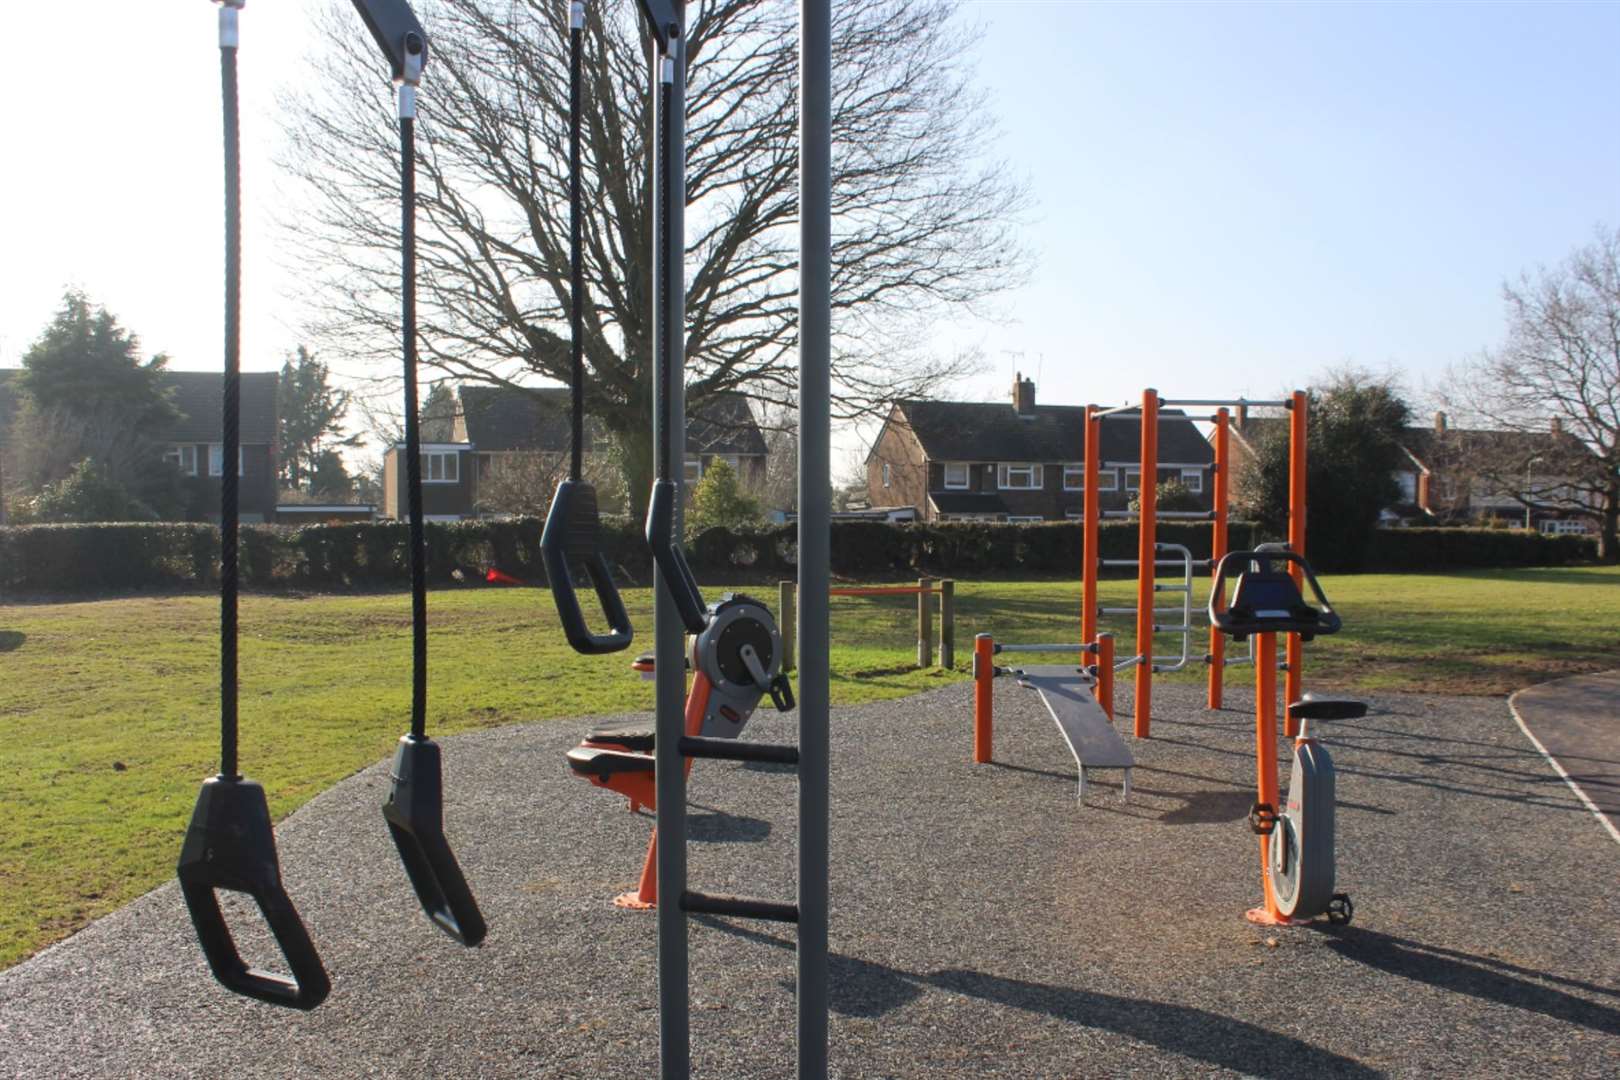 The site includes a new gym area. Picture: Ashford Borough Council